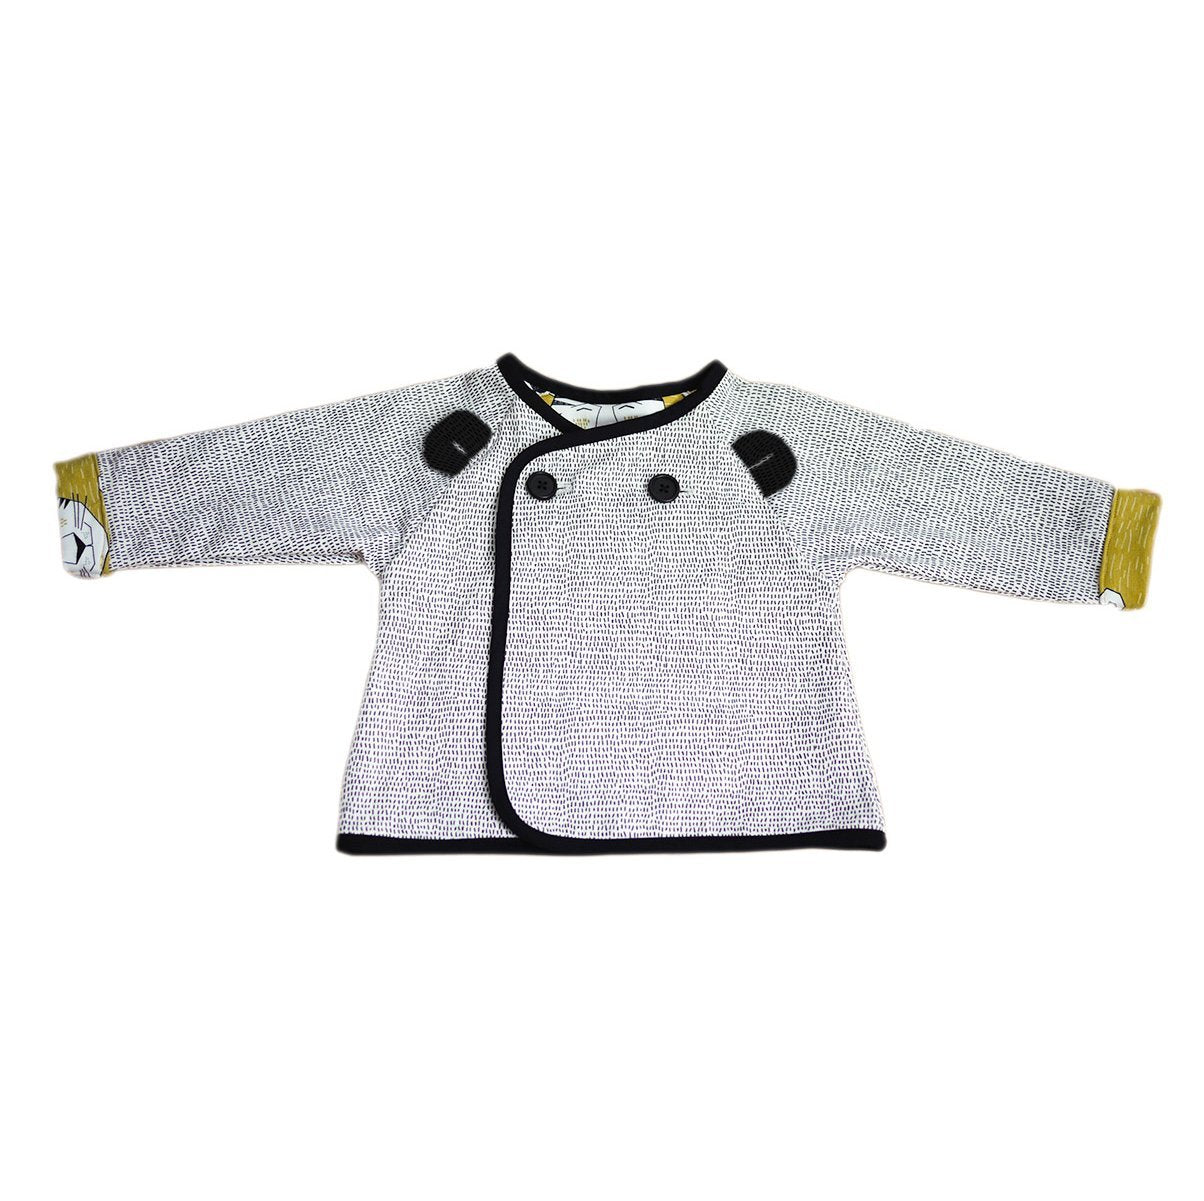 Ikatee - GRAND'OURSE Kids Cardigan - 3-12Y - Paper sewing pattern